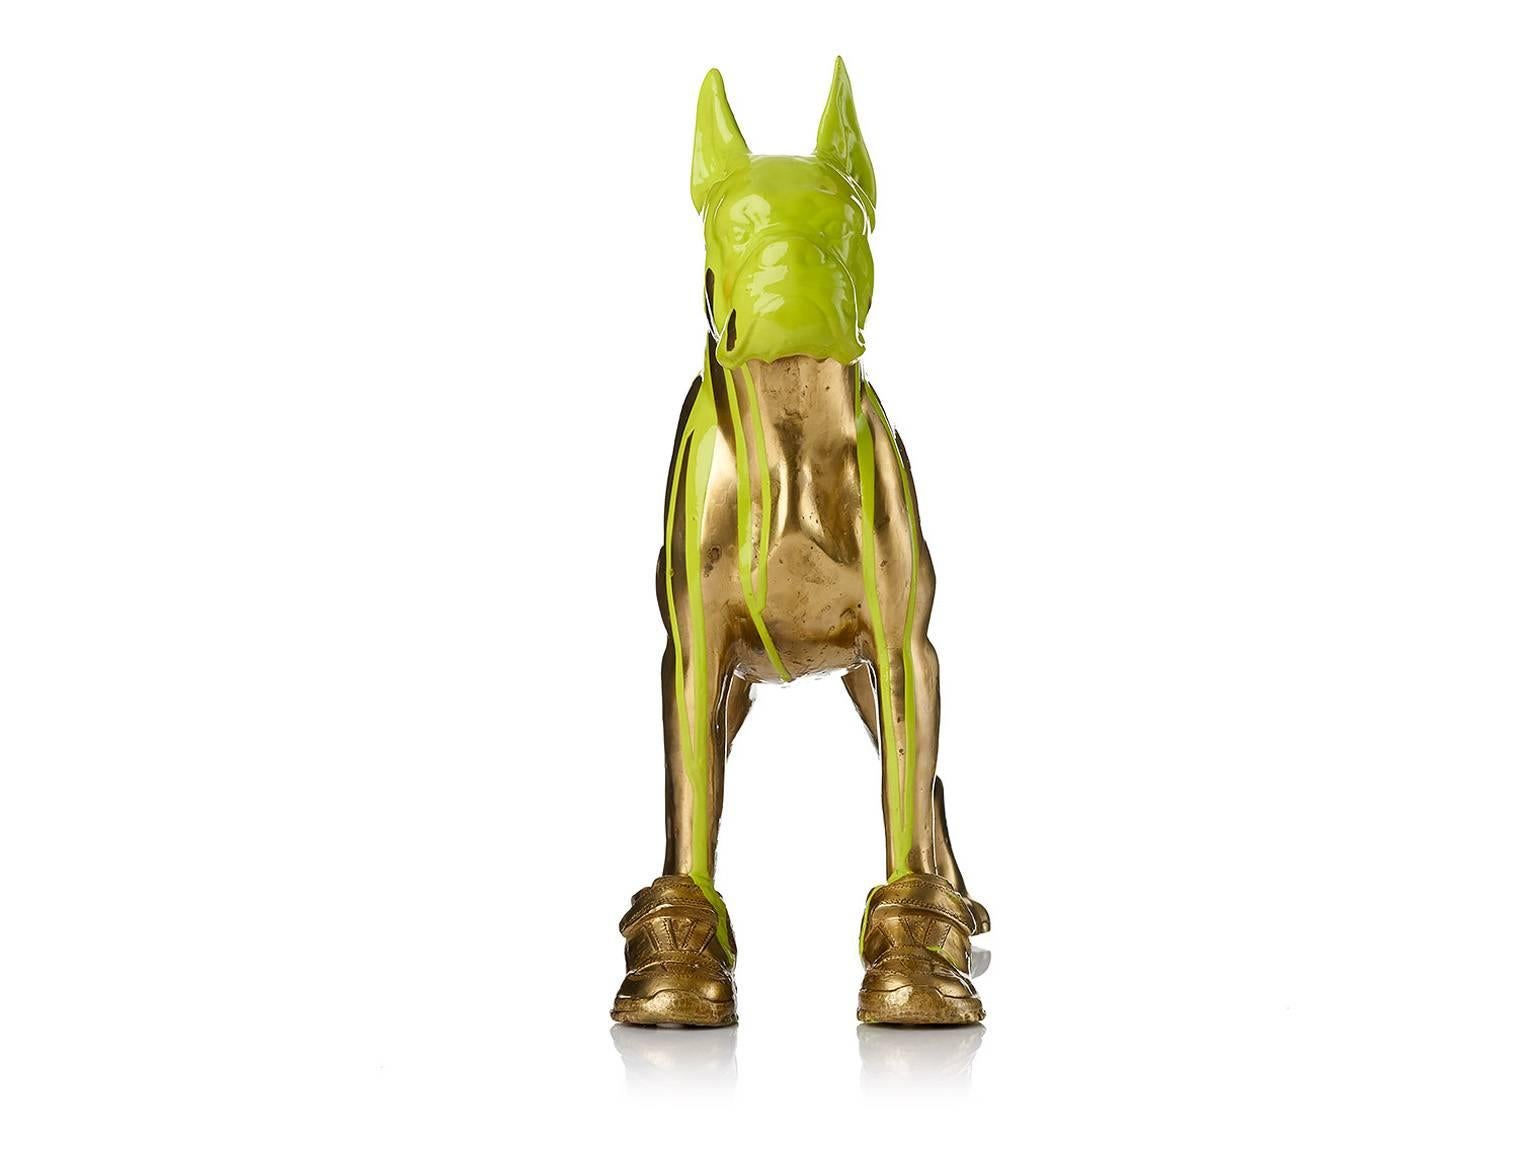  Cloned Bulldog with pet bottle. - Gold Figurative Sculpture by William Sweetlove